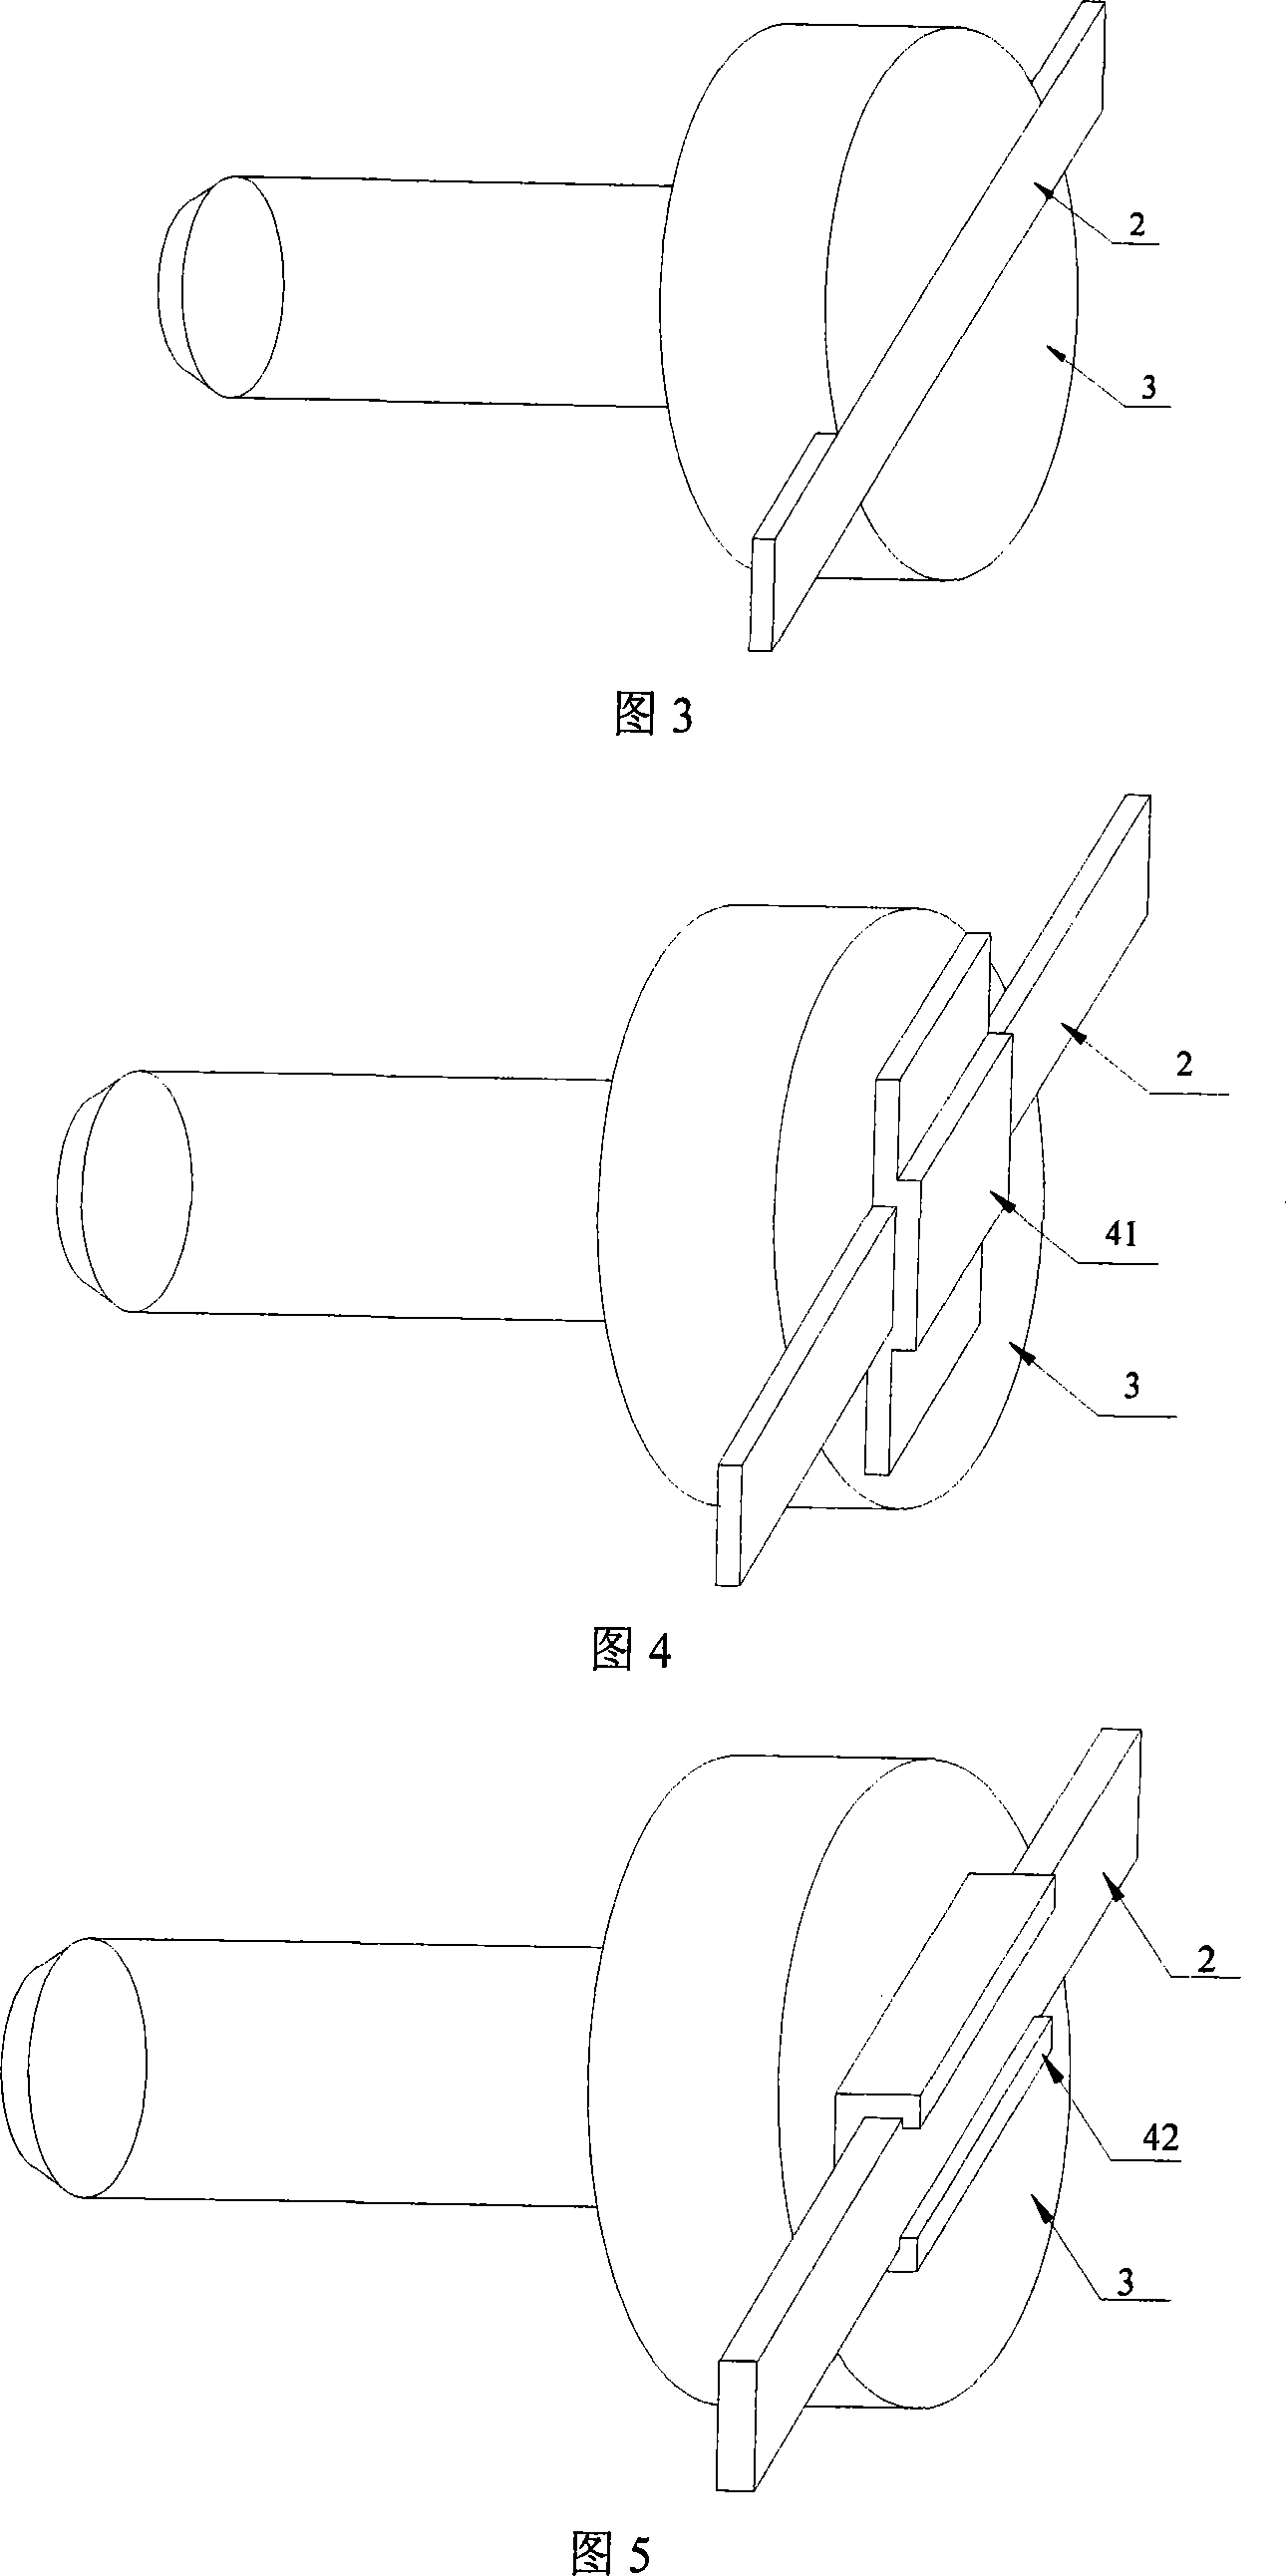 Two-sided immersion superconducting solenoid coil